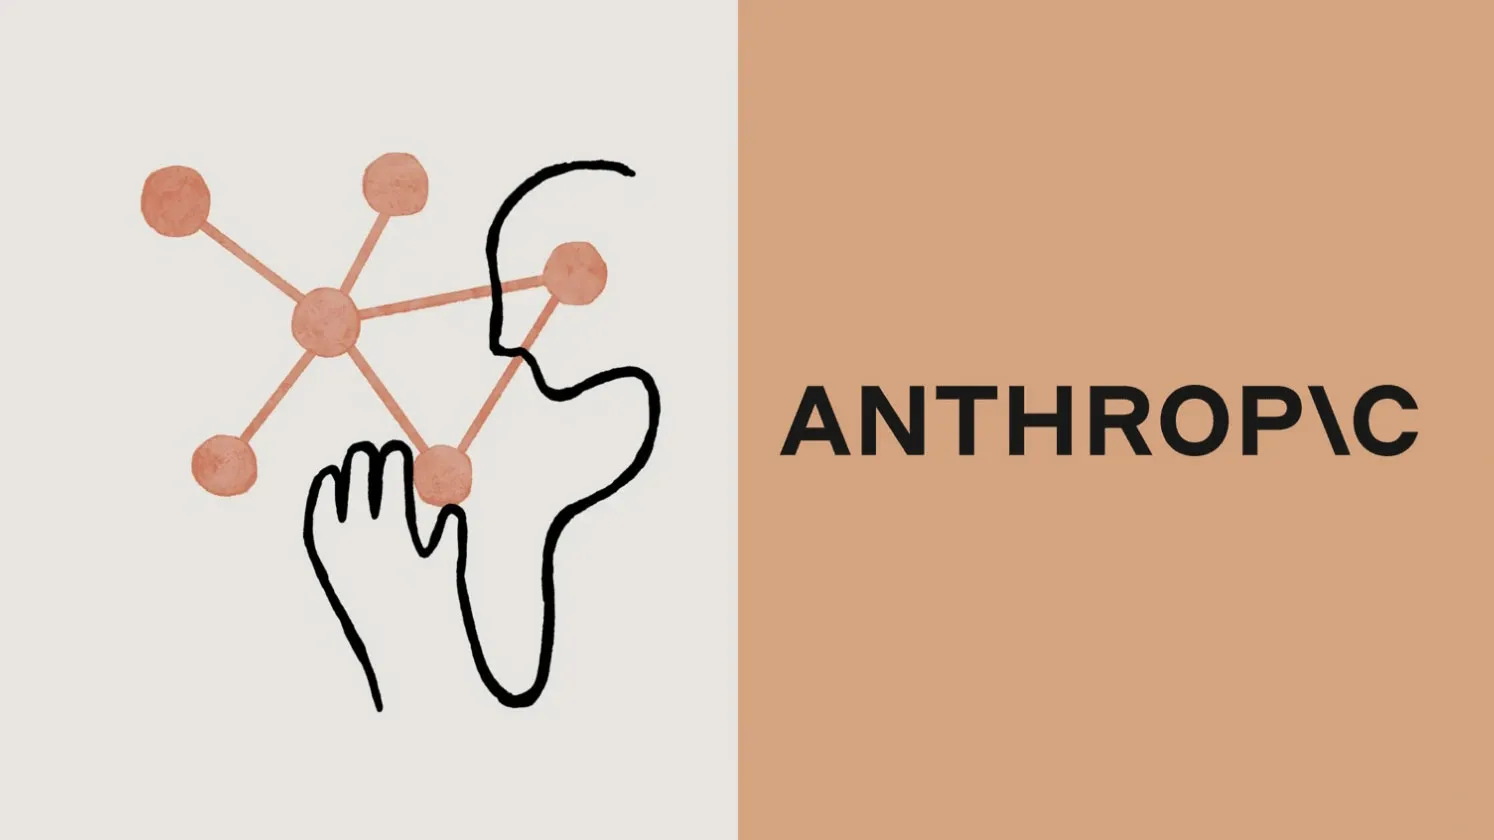 Anthropic, an OpenAI competitor, is in talks to raise $750m at a valuation of $18.4bn